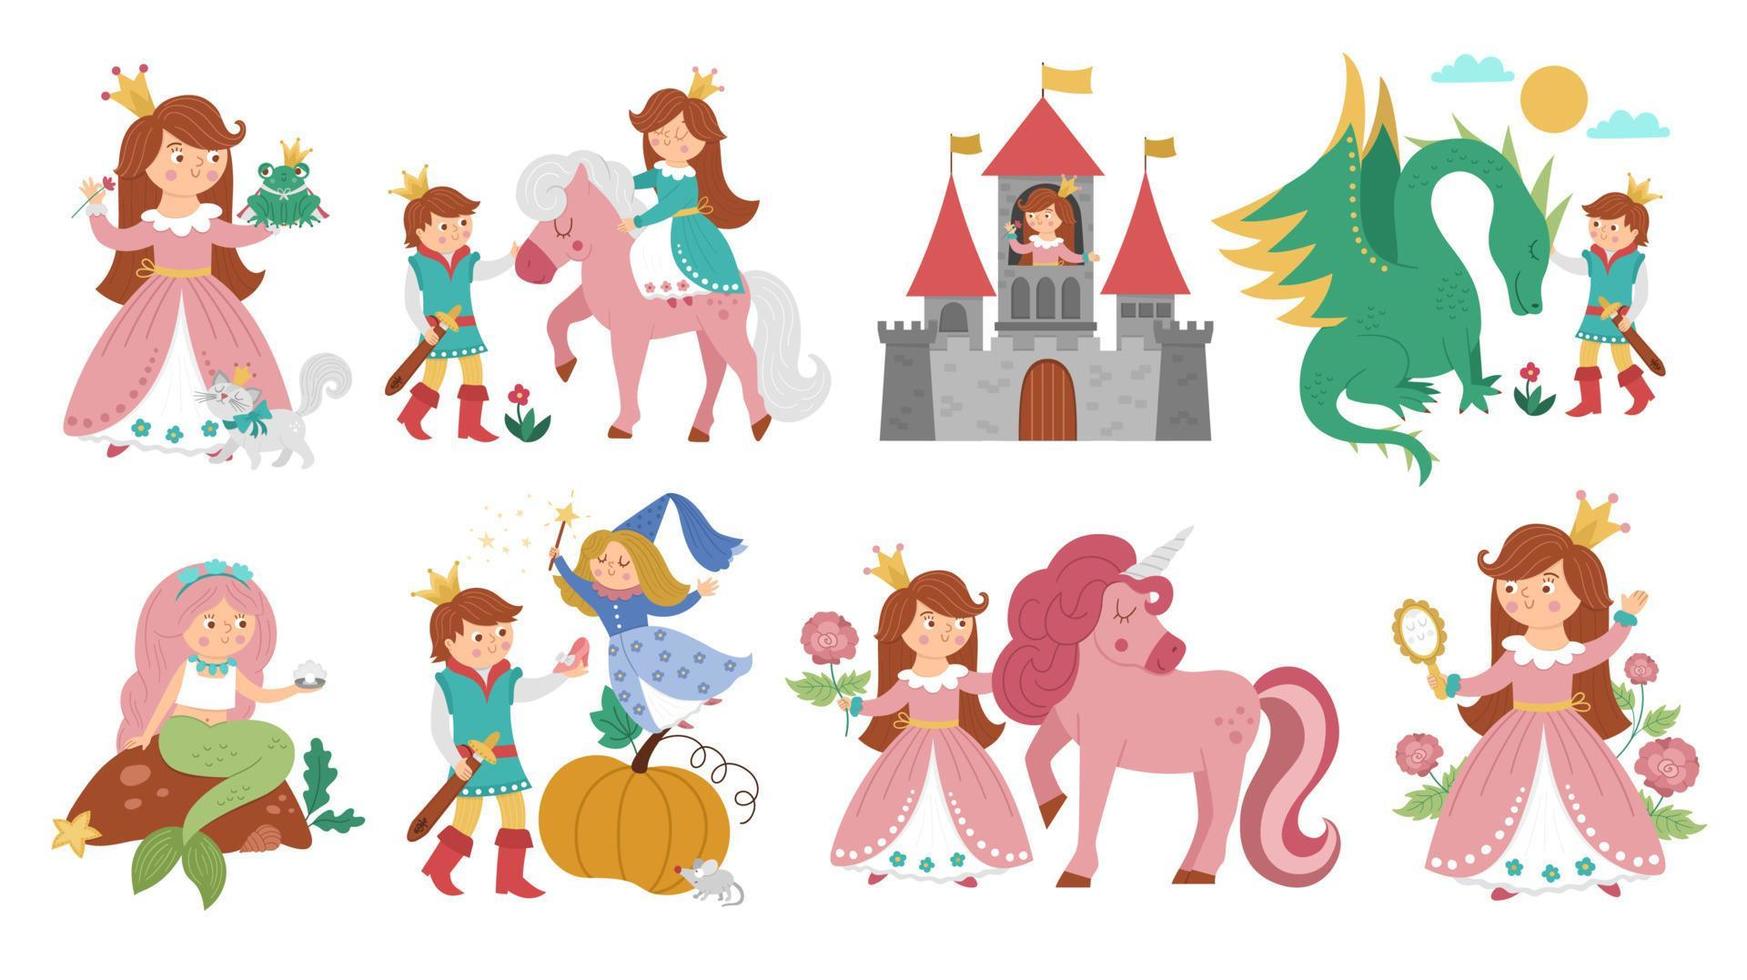 Fairy tale vector princess set. Fantasy girl collection. Medieval fairytale maid in pink dress. Girlish cartoon magic icons pack. Cinderella, sleeping beauty, frog prince, mermaid scenes